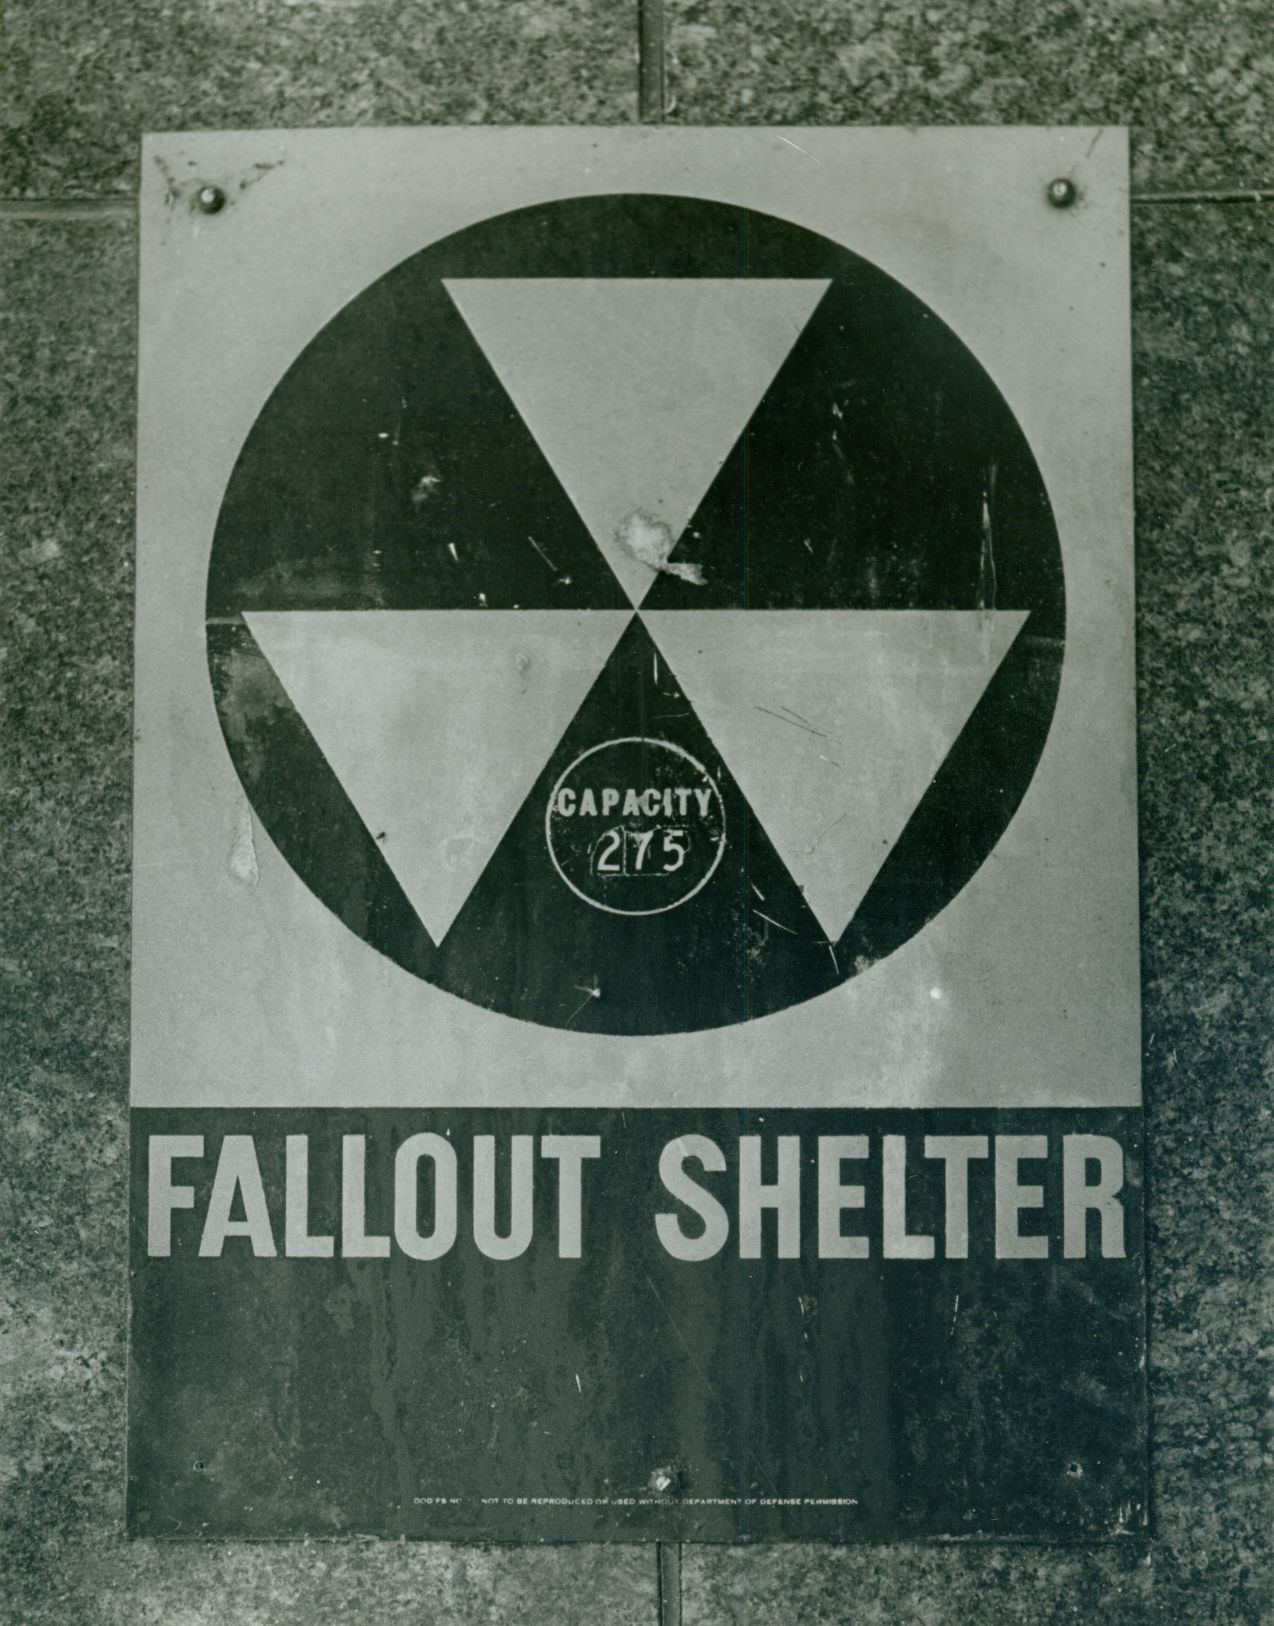 history of fallout shelter signs